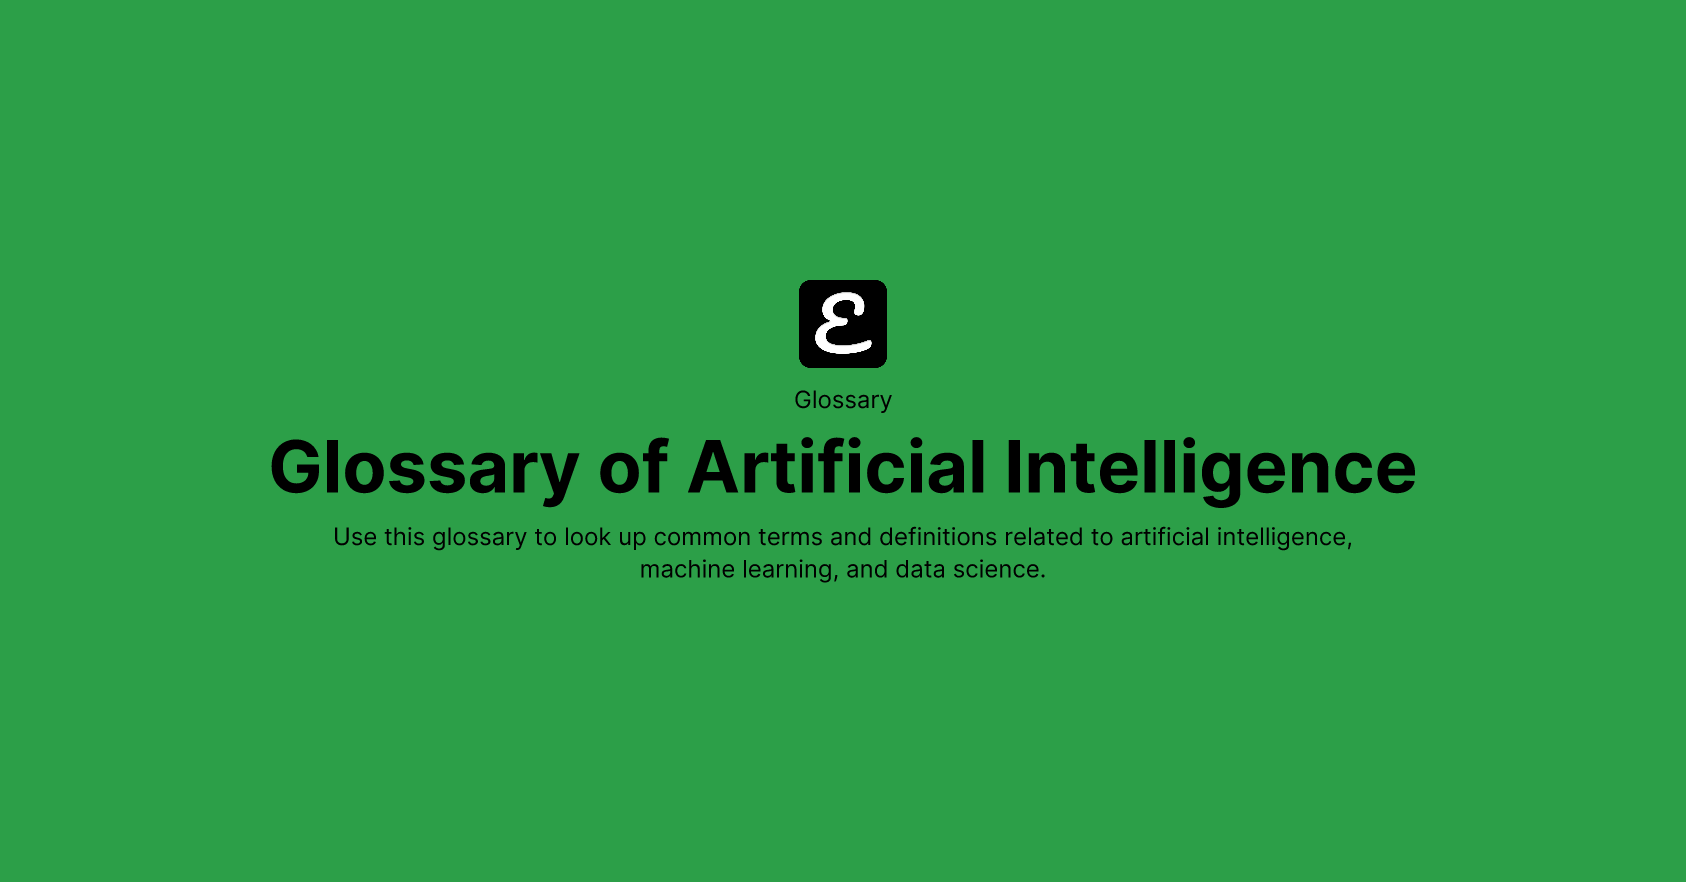 Glossary of Artificial Intelligence by Eric David Smith